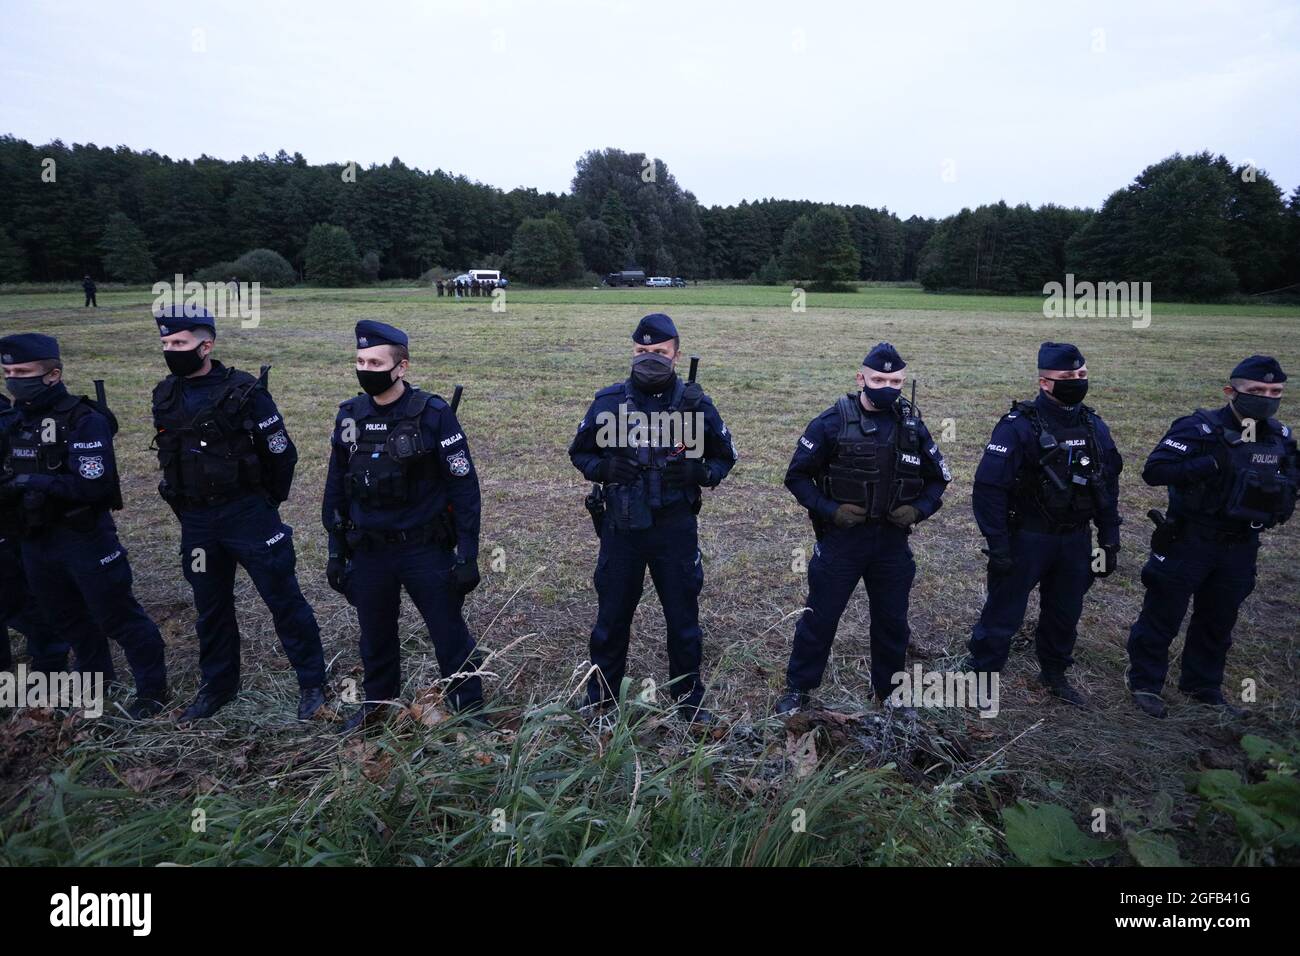 Police are seen cordonning off an area by a distance of some 300 meters where a group of Afghan refugees is stuck on the Belarusian border in Usnarz Gorny, Poland on August 24, 2021. For 16 days in a row 32 Afghan refugees have been stuck at the Polsh-Belarusian border without food or shelter. Polish authorities deny the migrants have ever reached Polish soil contraty to reports from local individuals who have stated the group has been pushed back by border guards. In August of this year nearly 3000 refugees have been reported attempting to cross the border compred to less than 100 in all of 2 Stock Photo